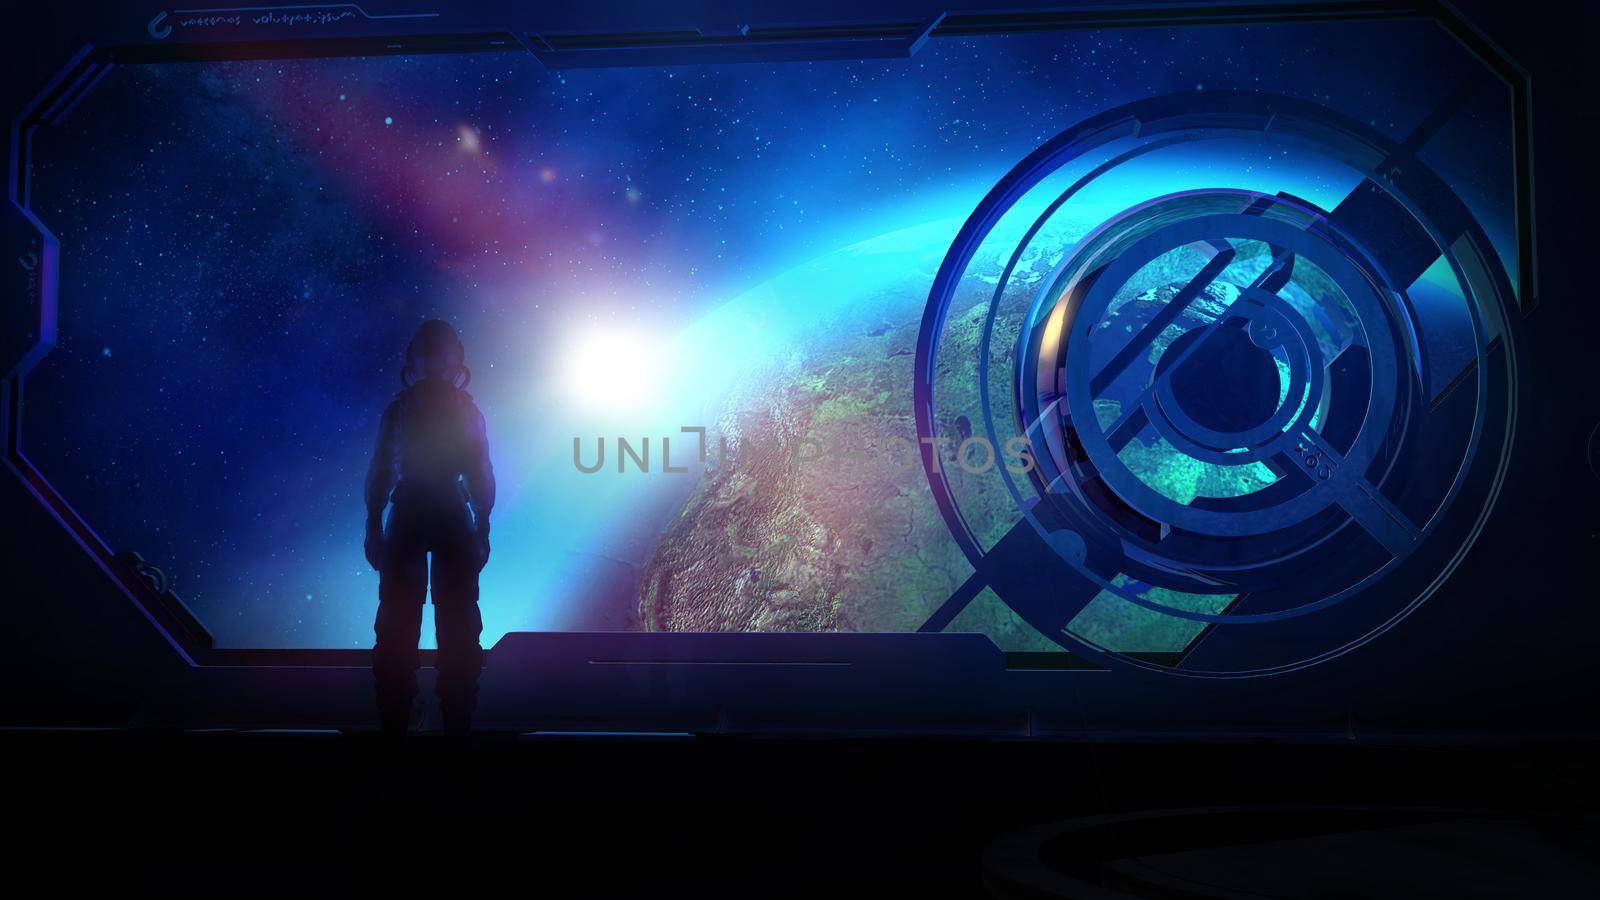 Fantasy on the theme of the future of space exploration and astronautics. 3D render.